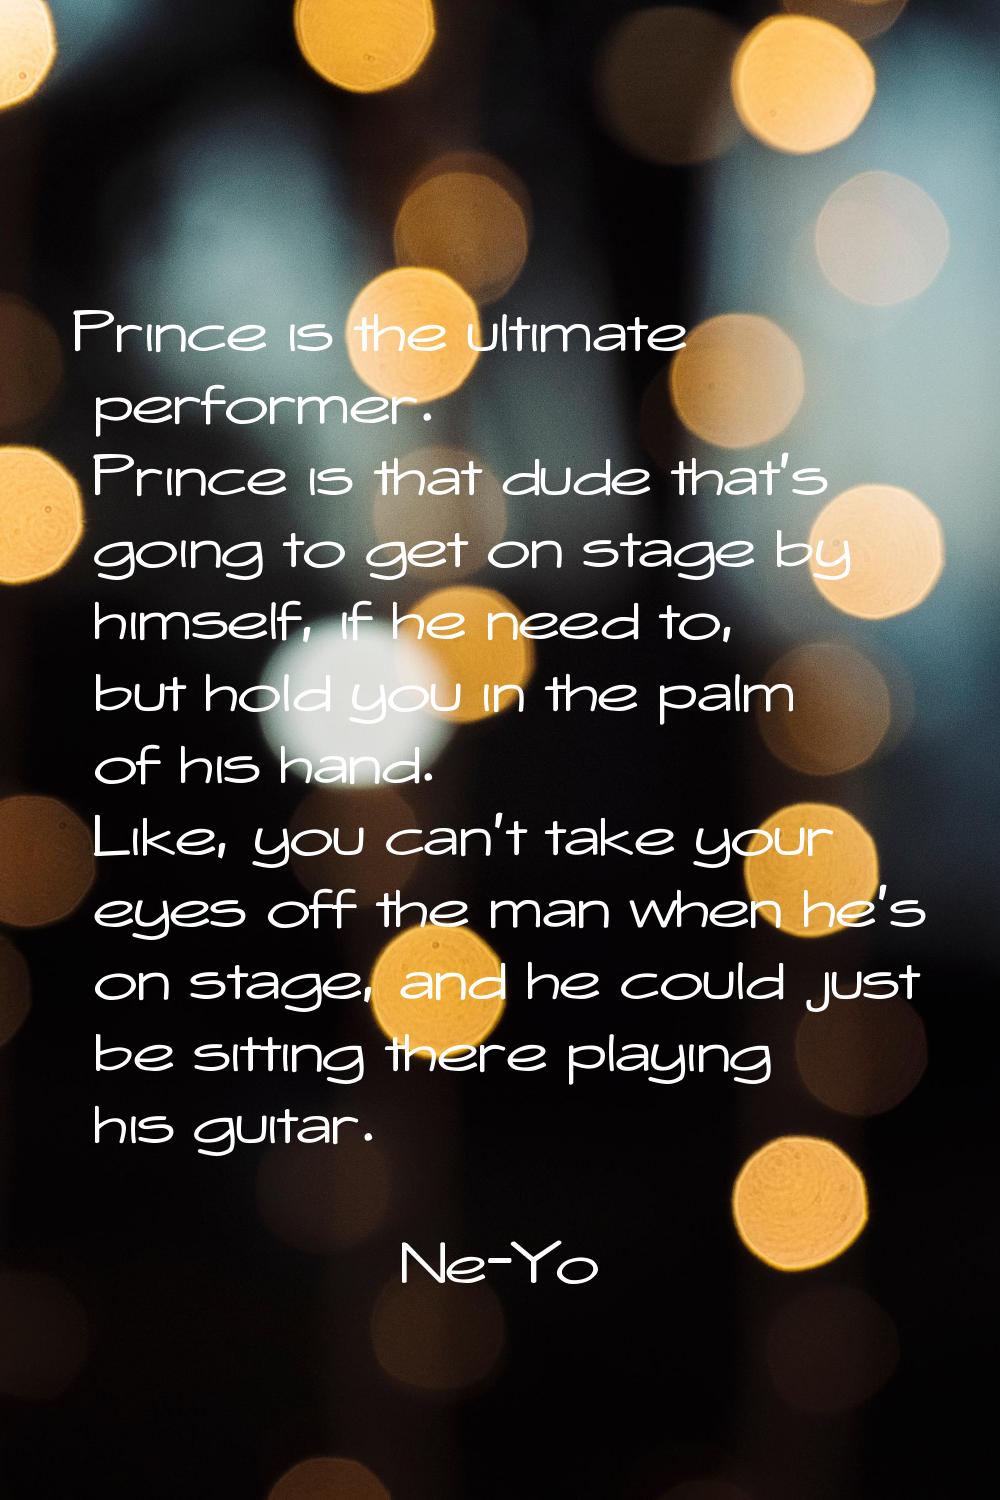 Prince is the ultimate performer. Prince is that dude that's going to get on stage by himself, if h